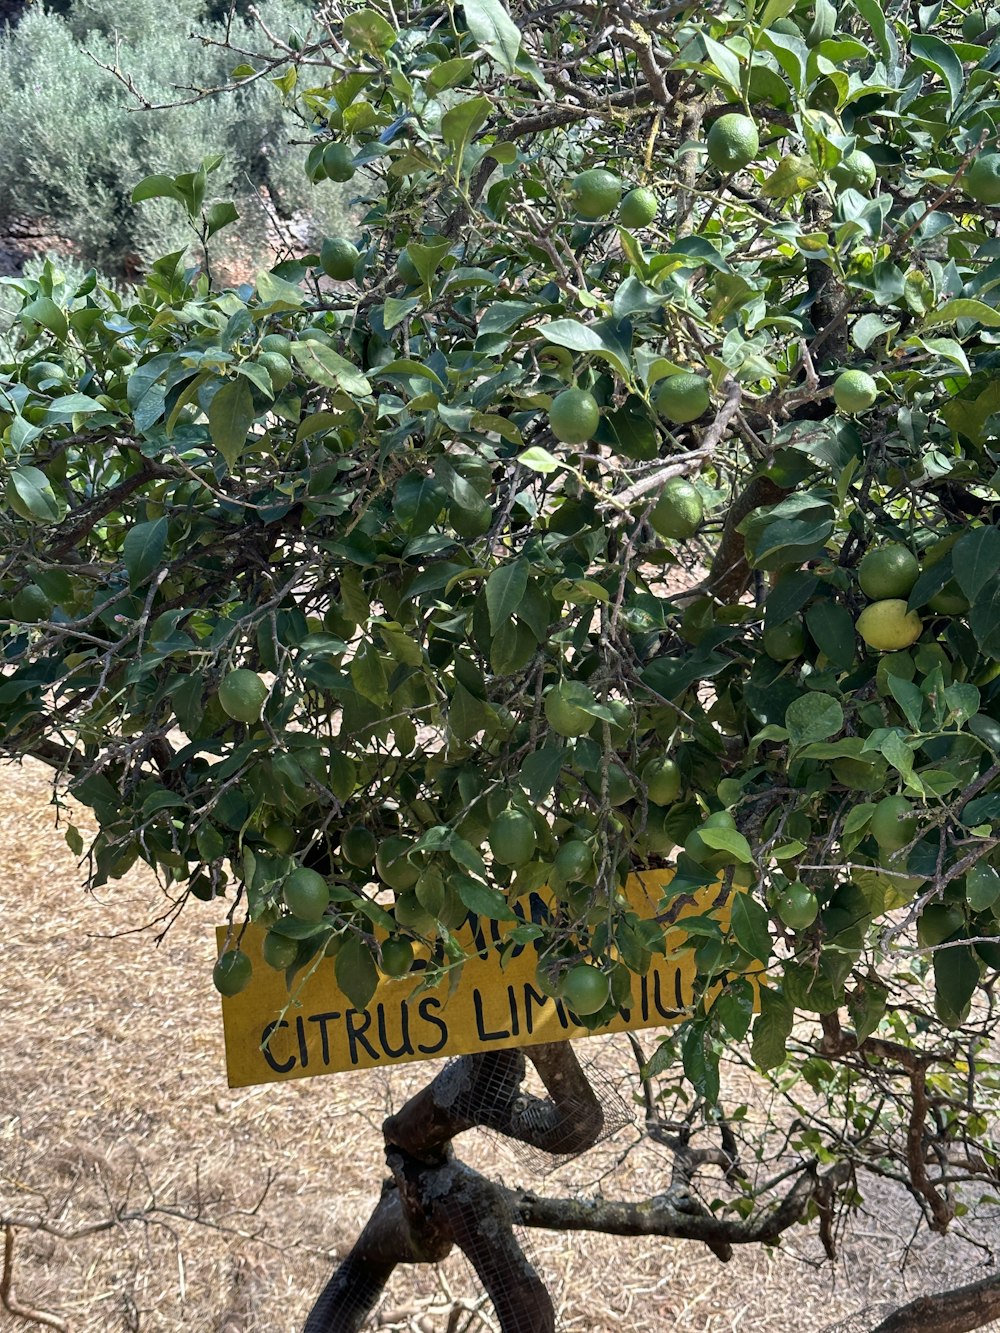 a sign that is hanging from a tree